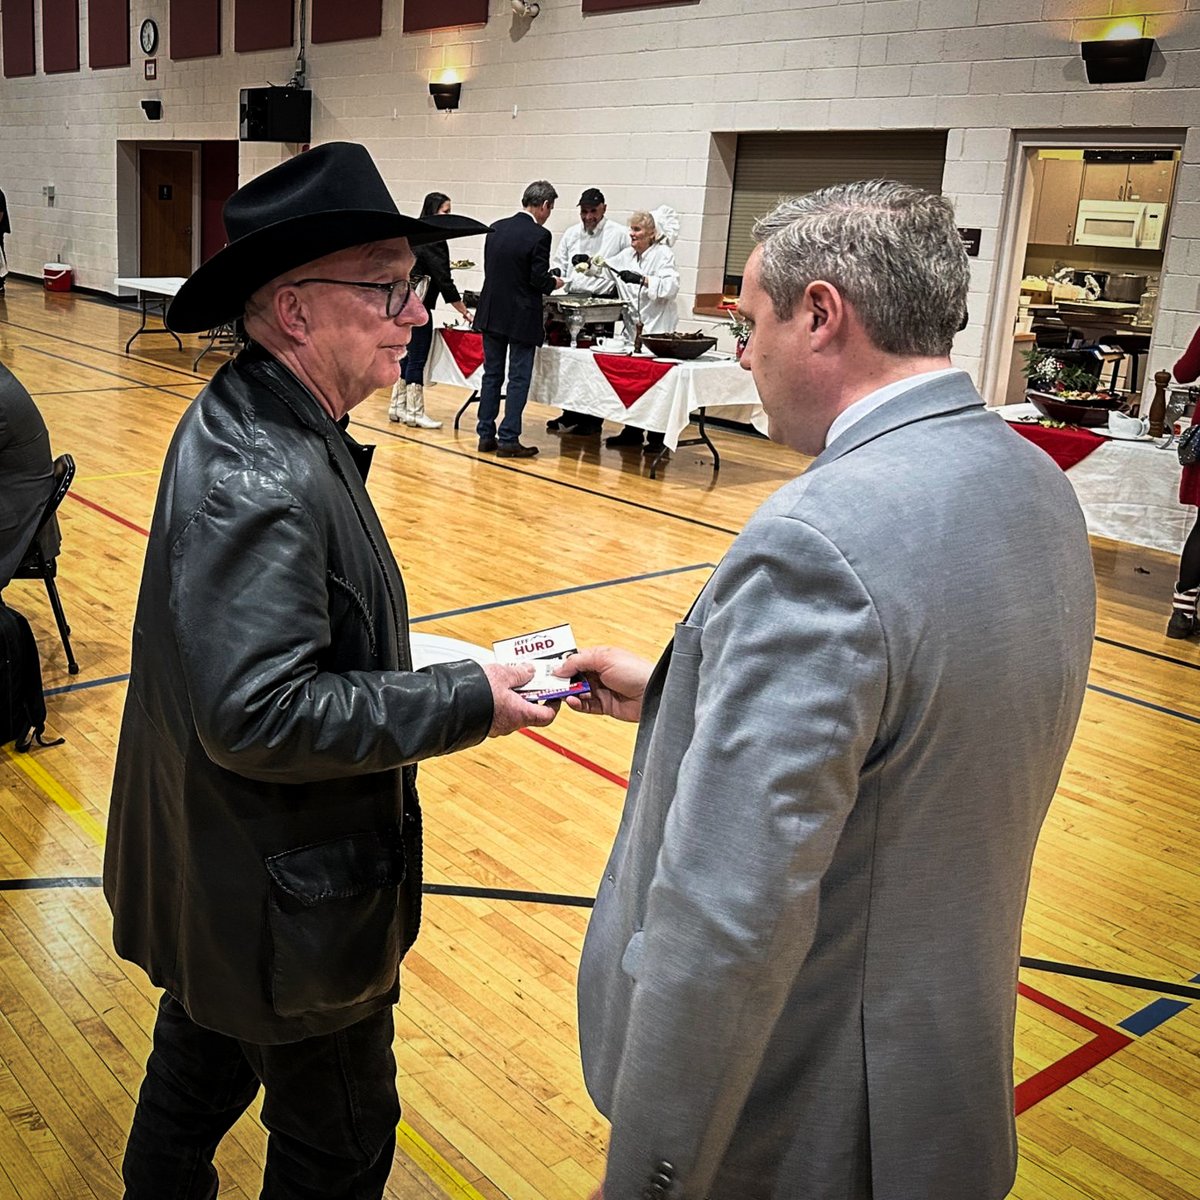 Thanks to the Archuleta County GOP for hosting a great Lincoln Day Dinner recently in Pagosa Springs. Shook a lot of hands and met a lot of great people! #co03 #politics #pagosasprings